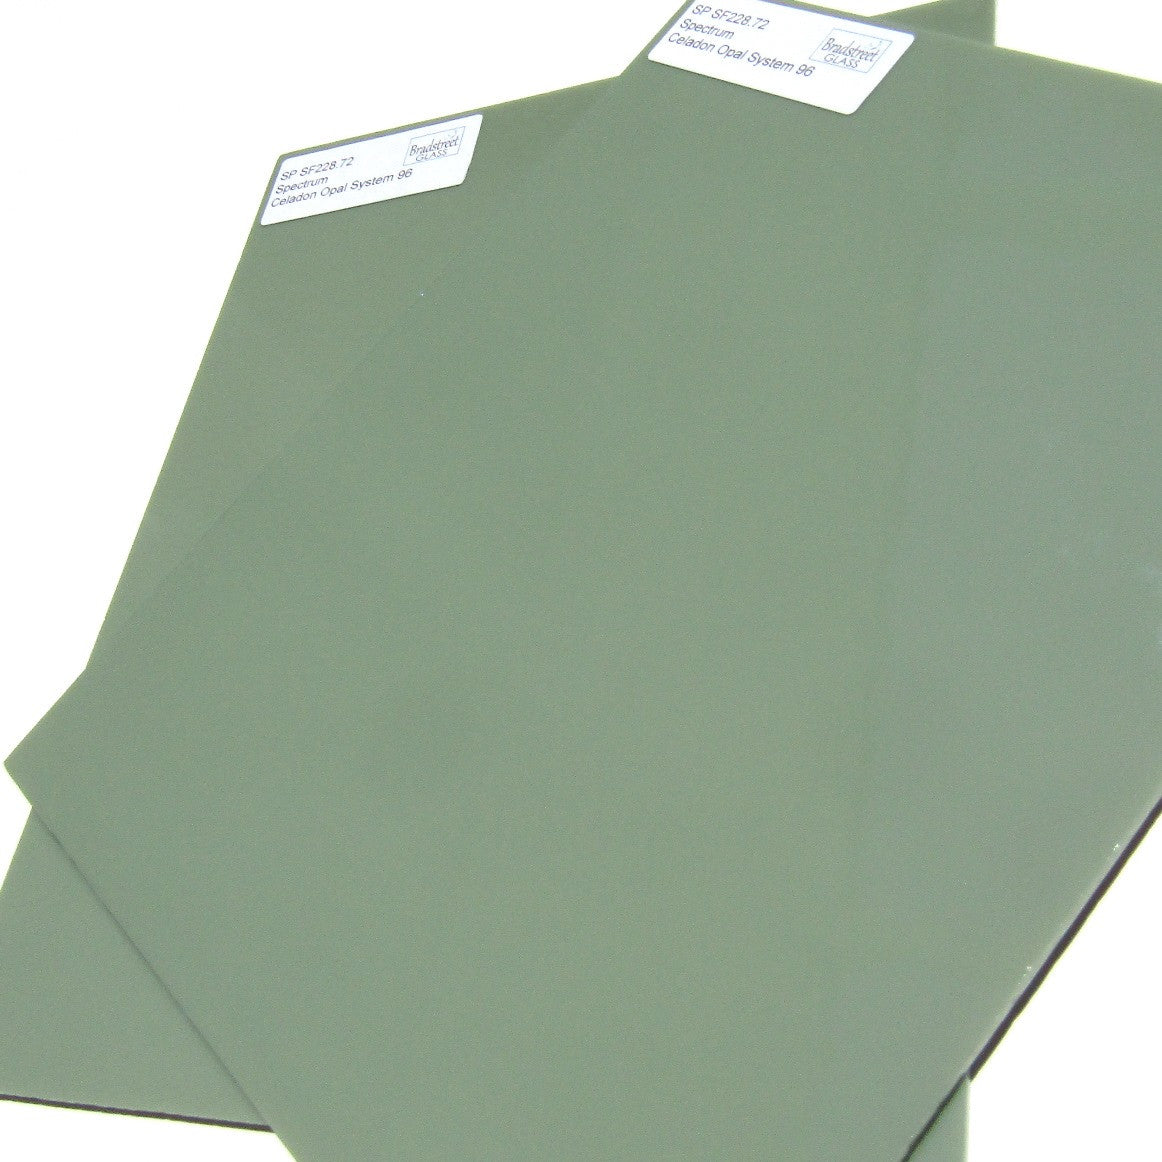 Spectrum Opaque Celadon Opal System 96 Fusible Green Stained Glass Sheet SF228.72